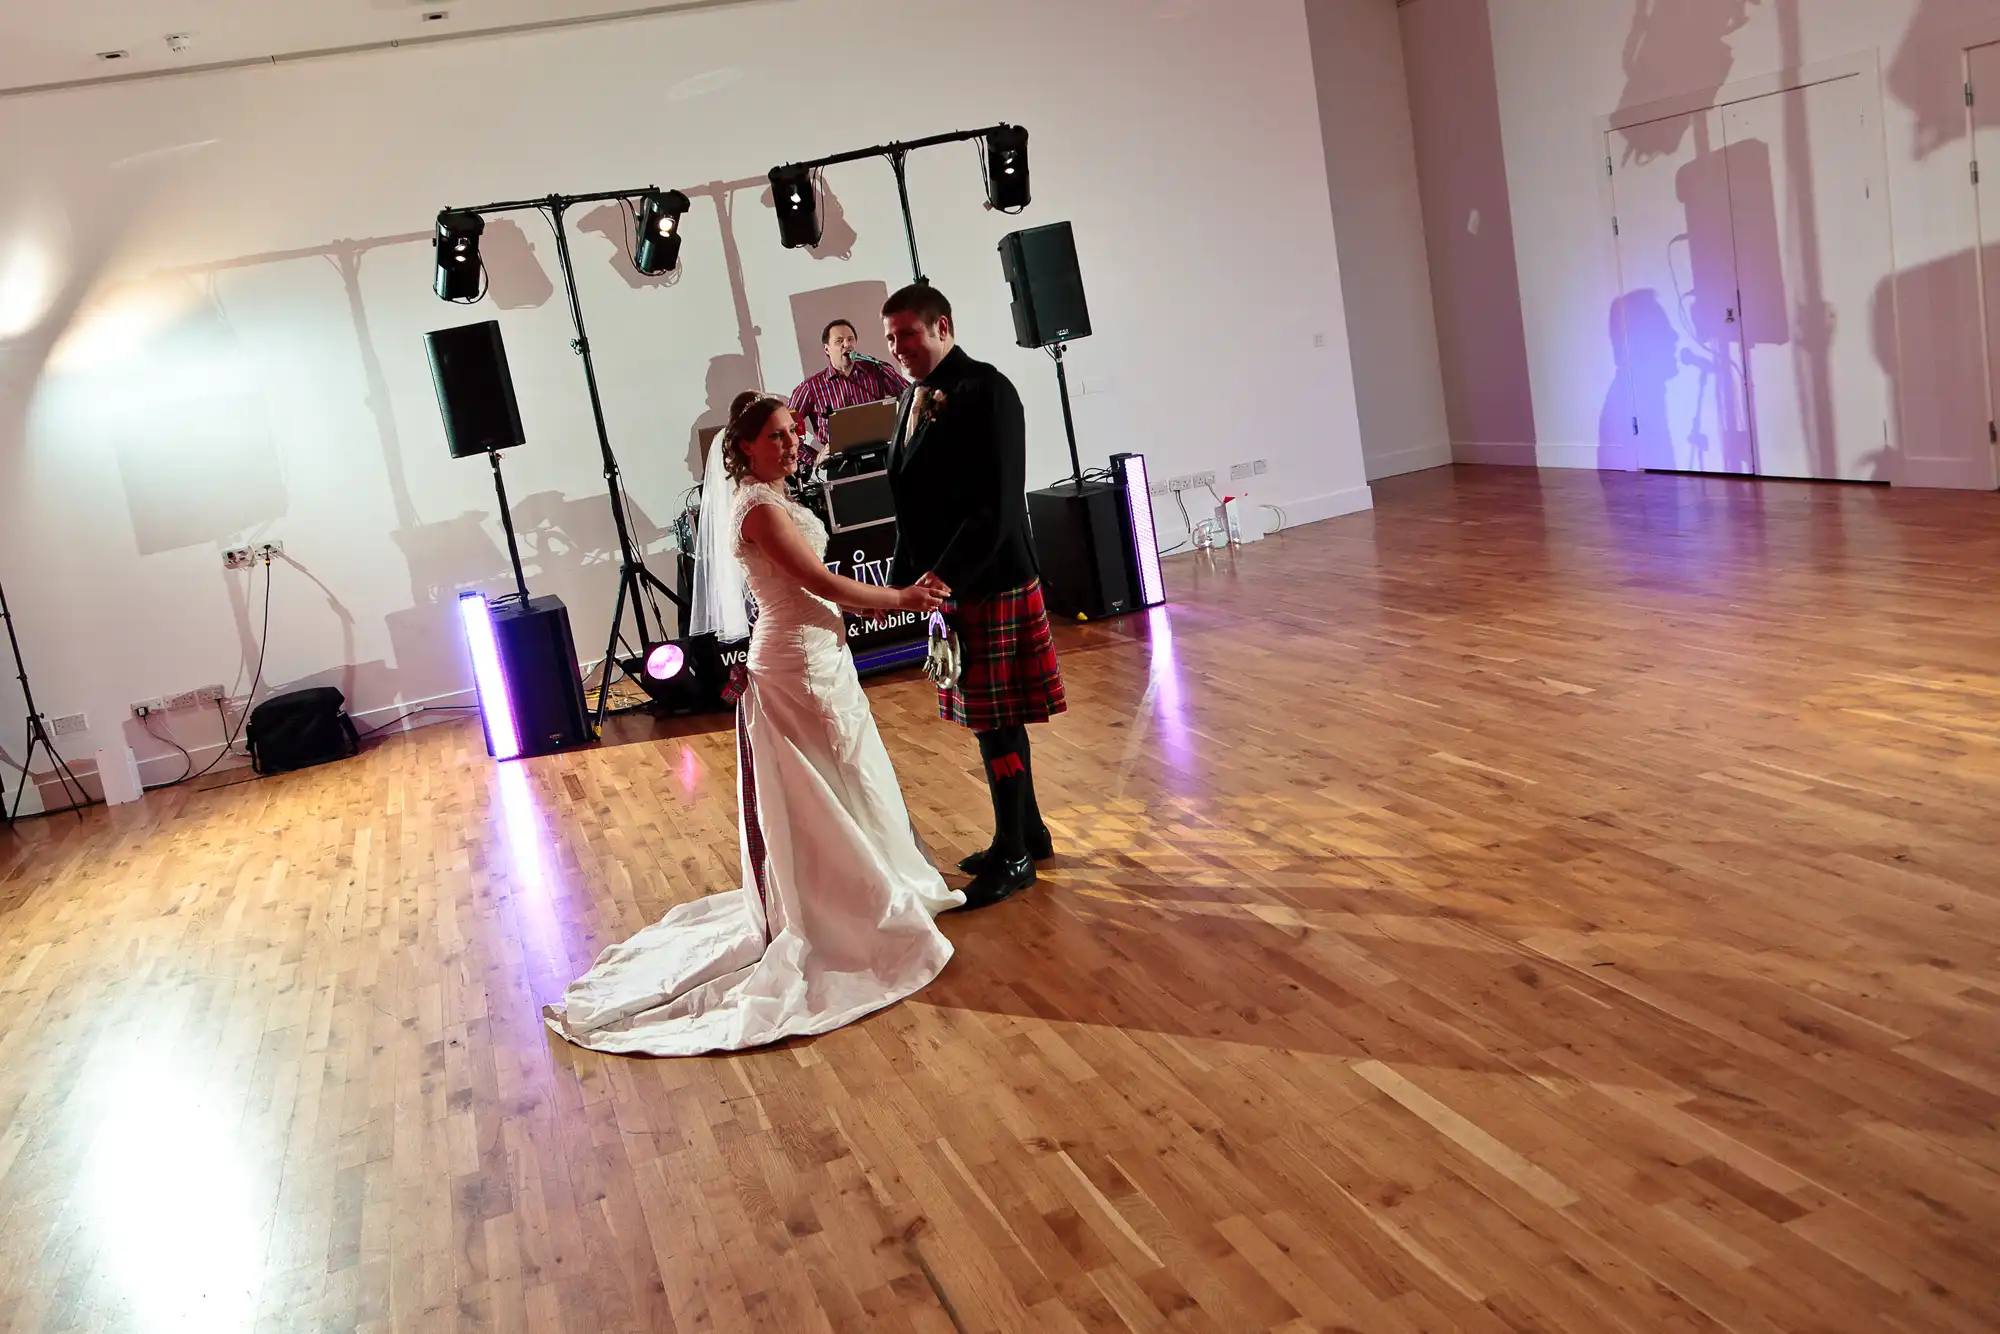 A bride in a white dress and a groom in a traditional kilt dance together in a well-lit hall with a dj setup in the background.